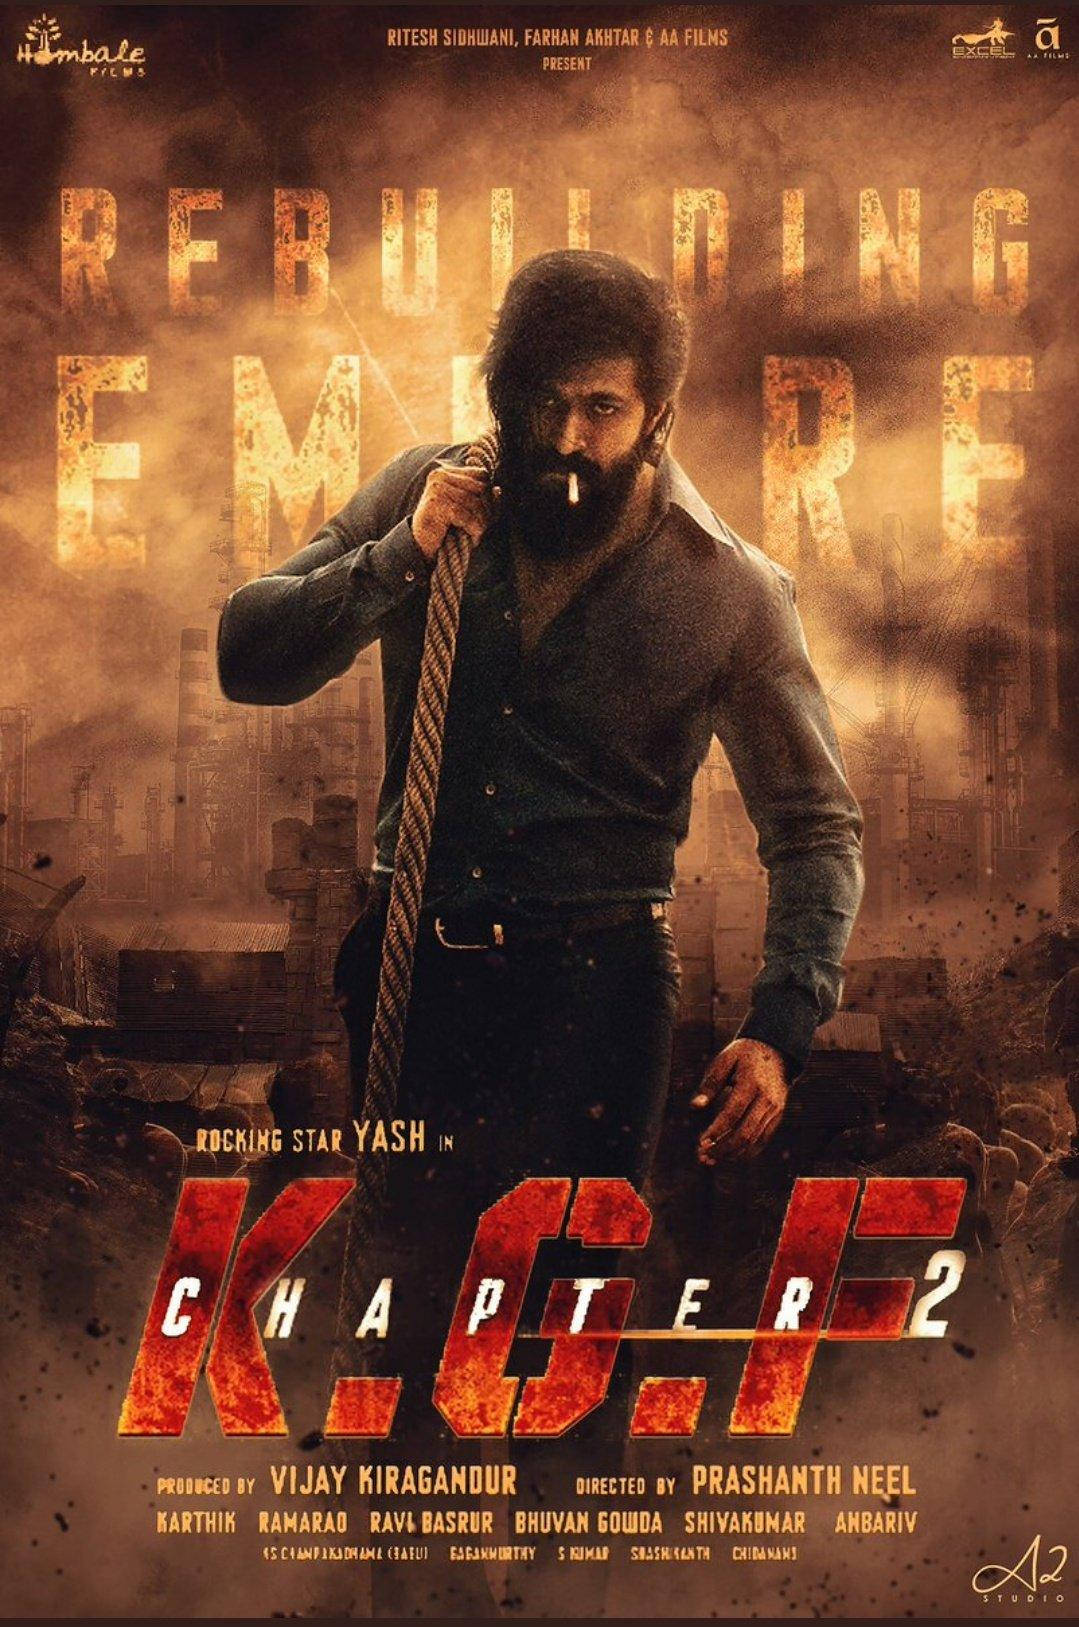 Cool Kgf Chapter 2 Poster